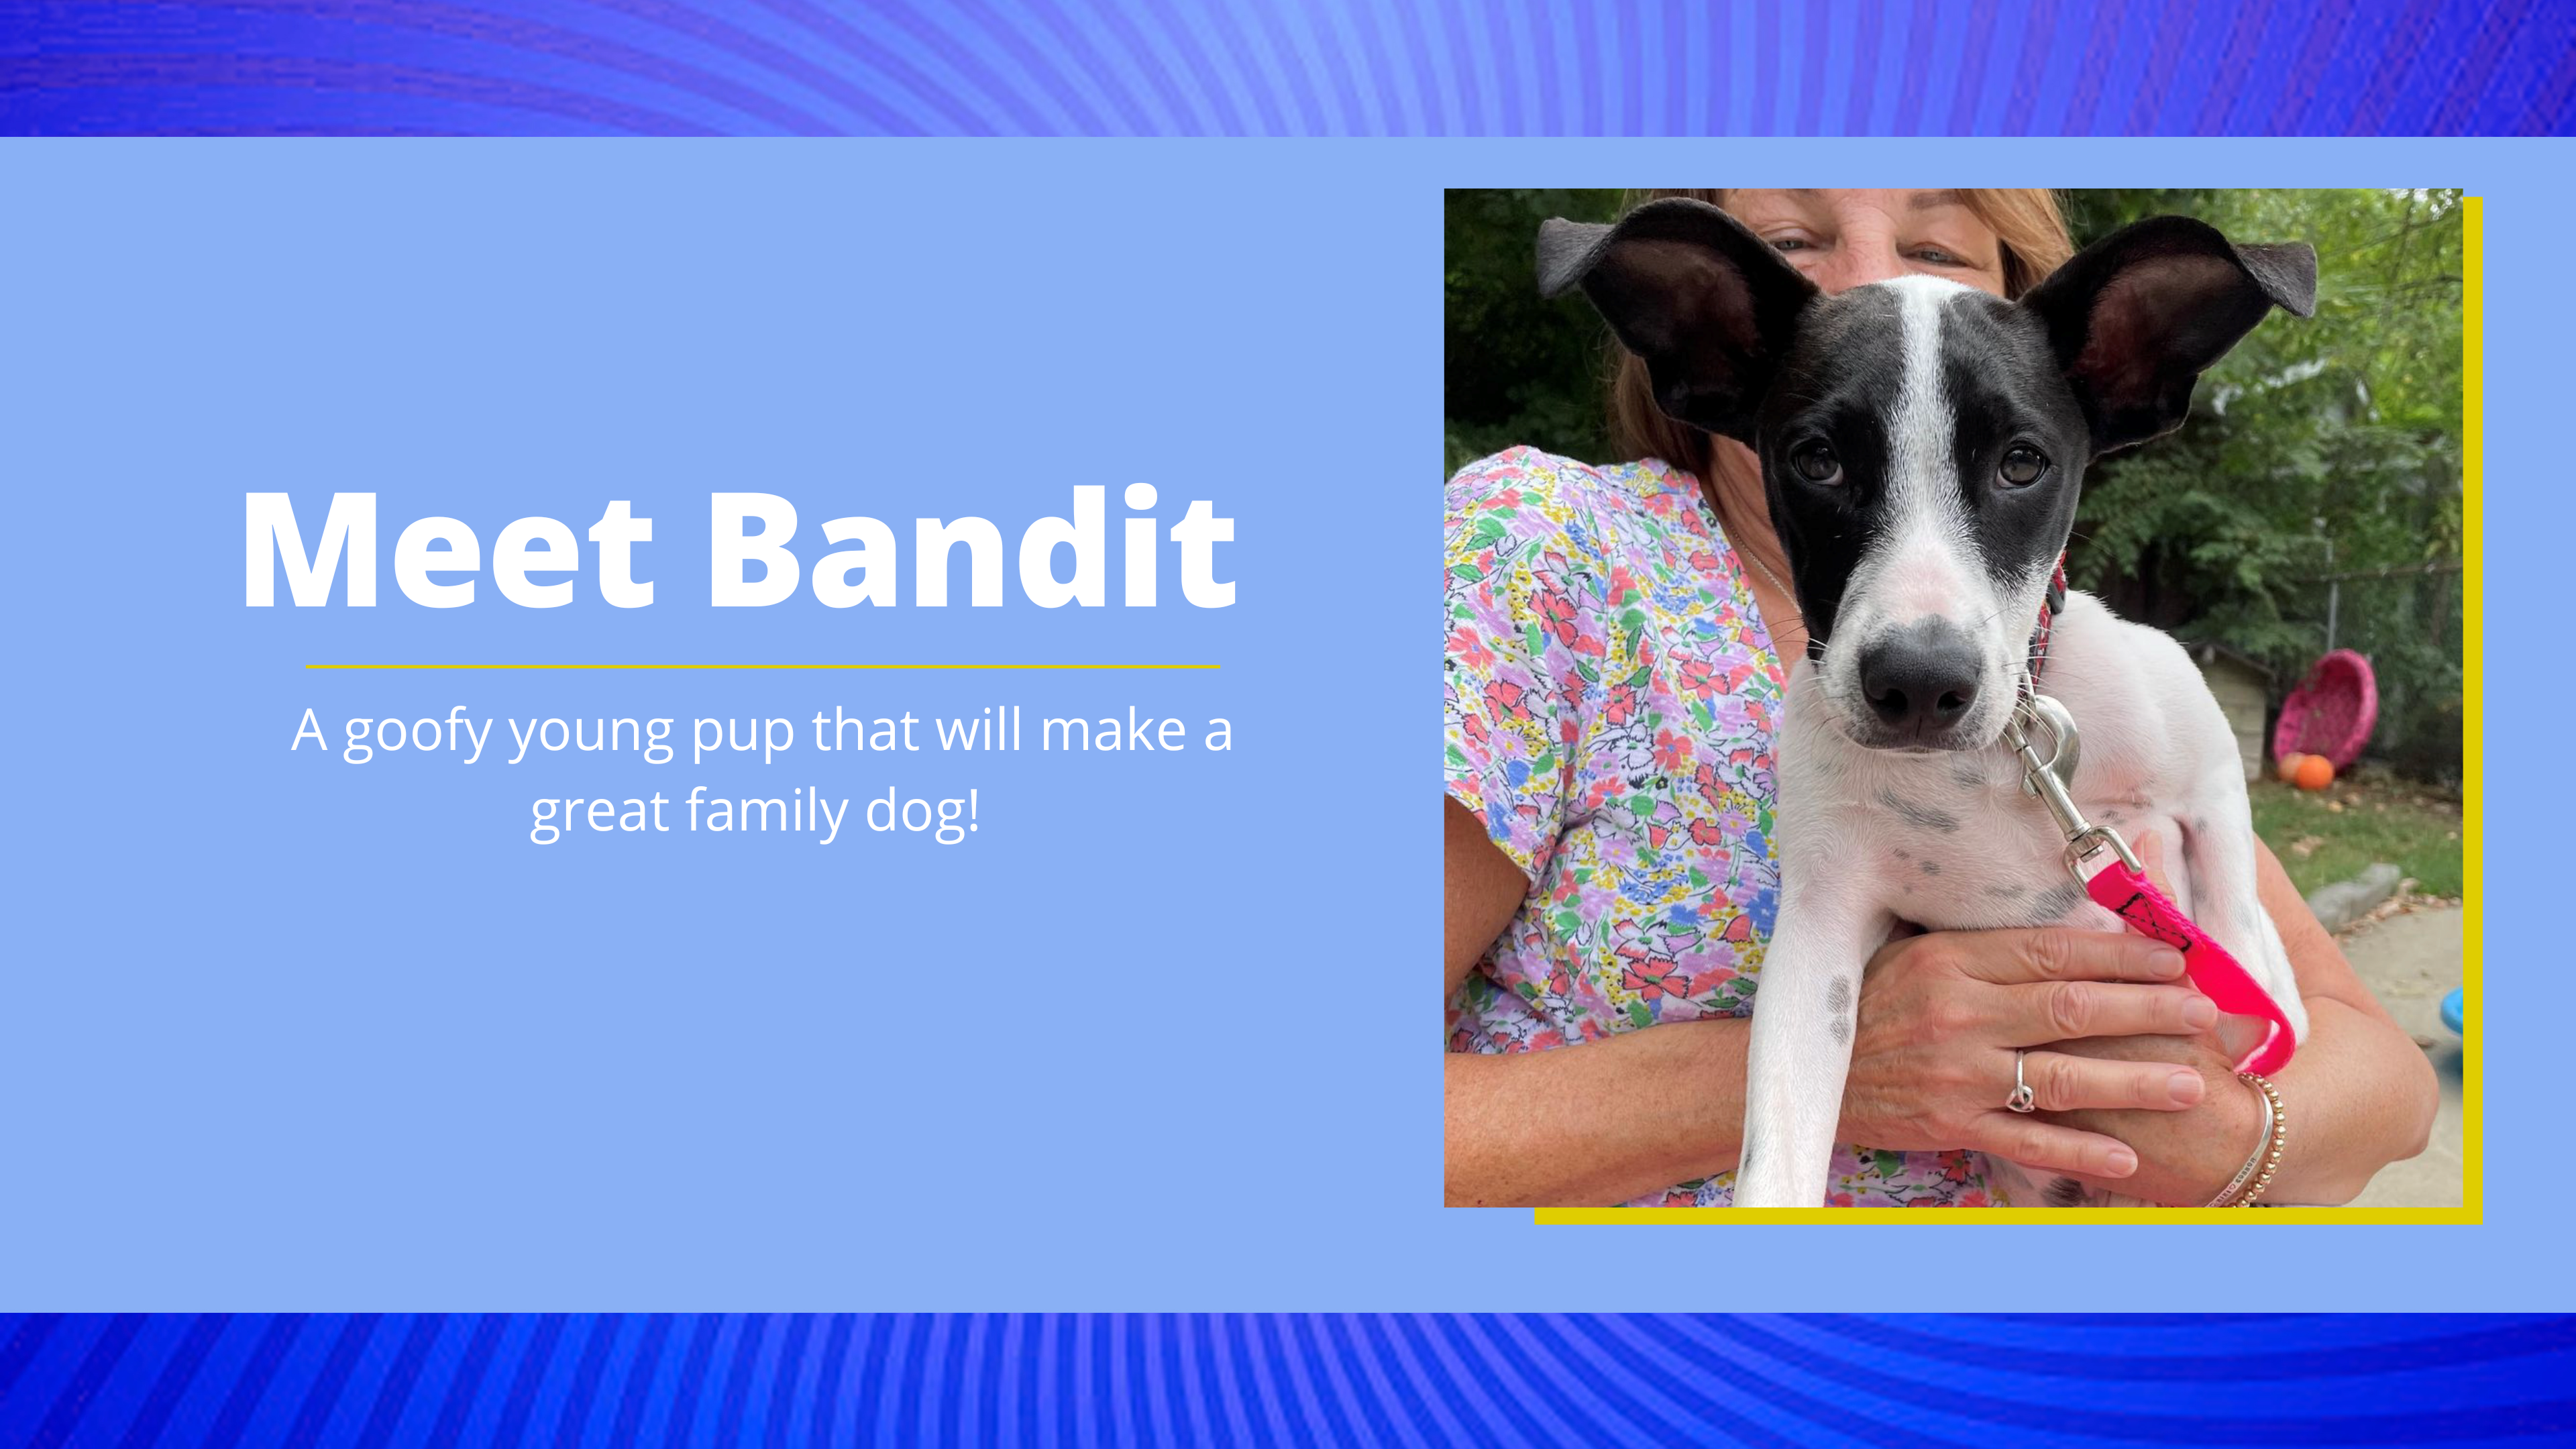 Bandit is playful puppy and is available for adoption in Beacon